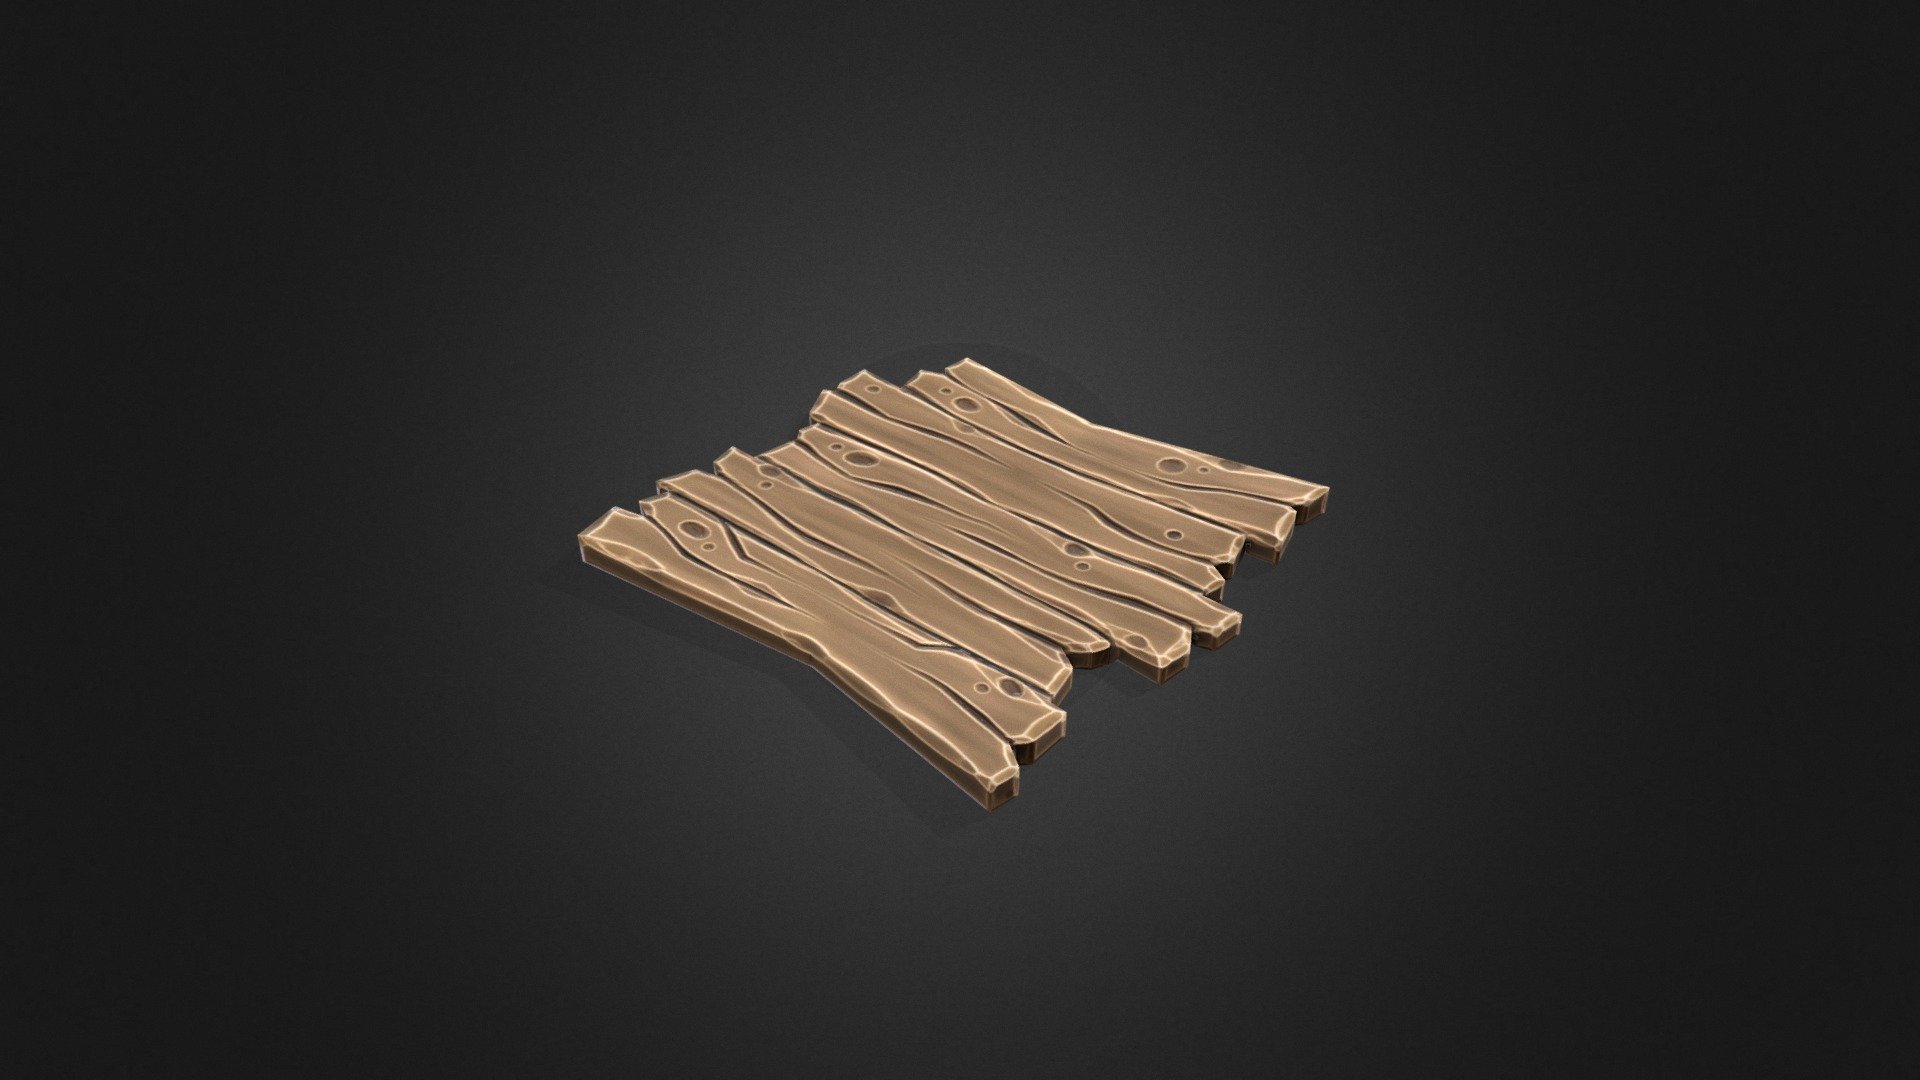 Stylized low-poly wood floor make in blender and substance painter.
It's a test for something more complex 3d model